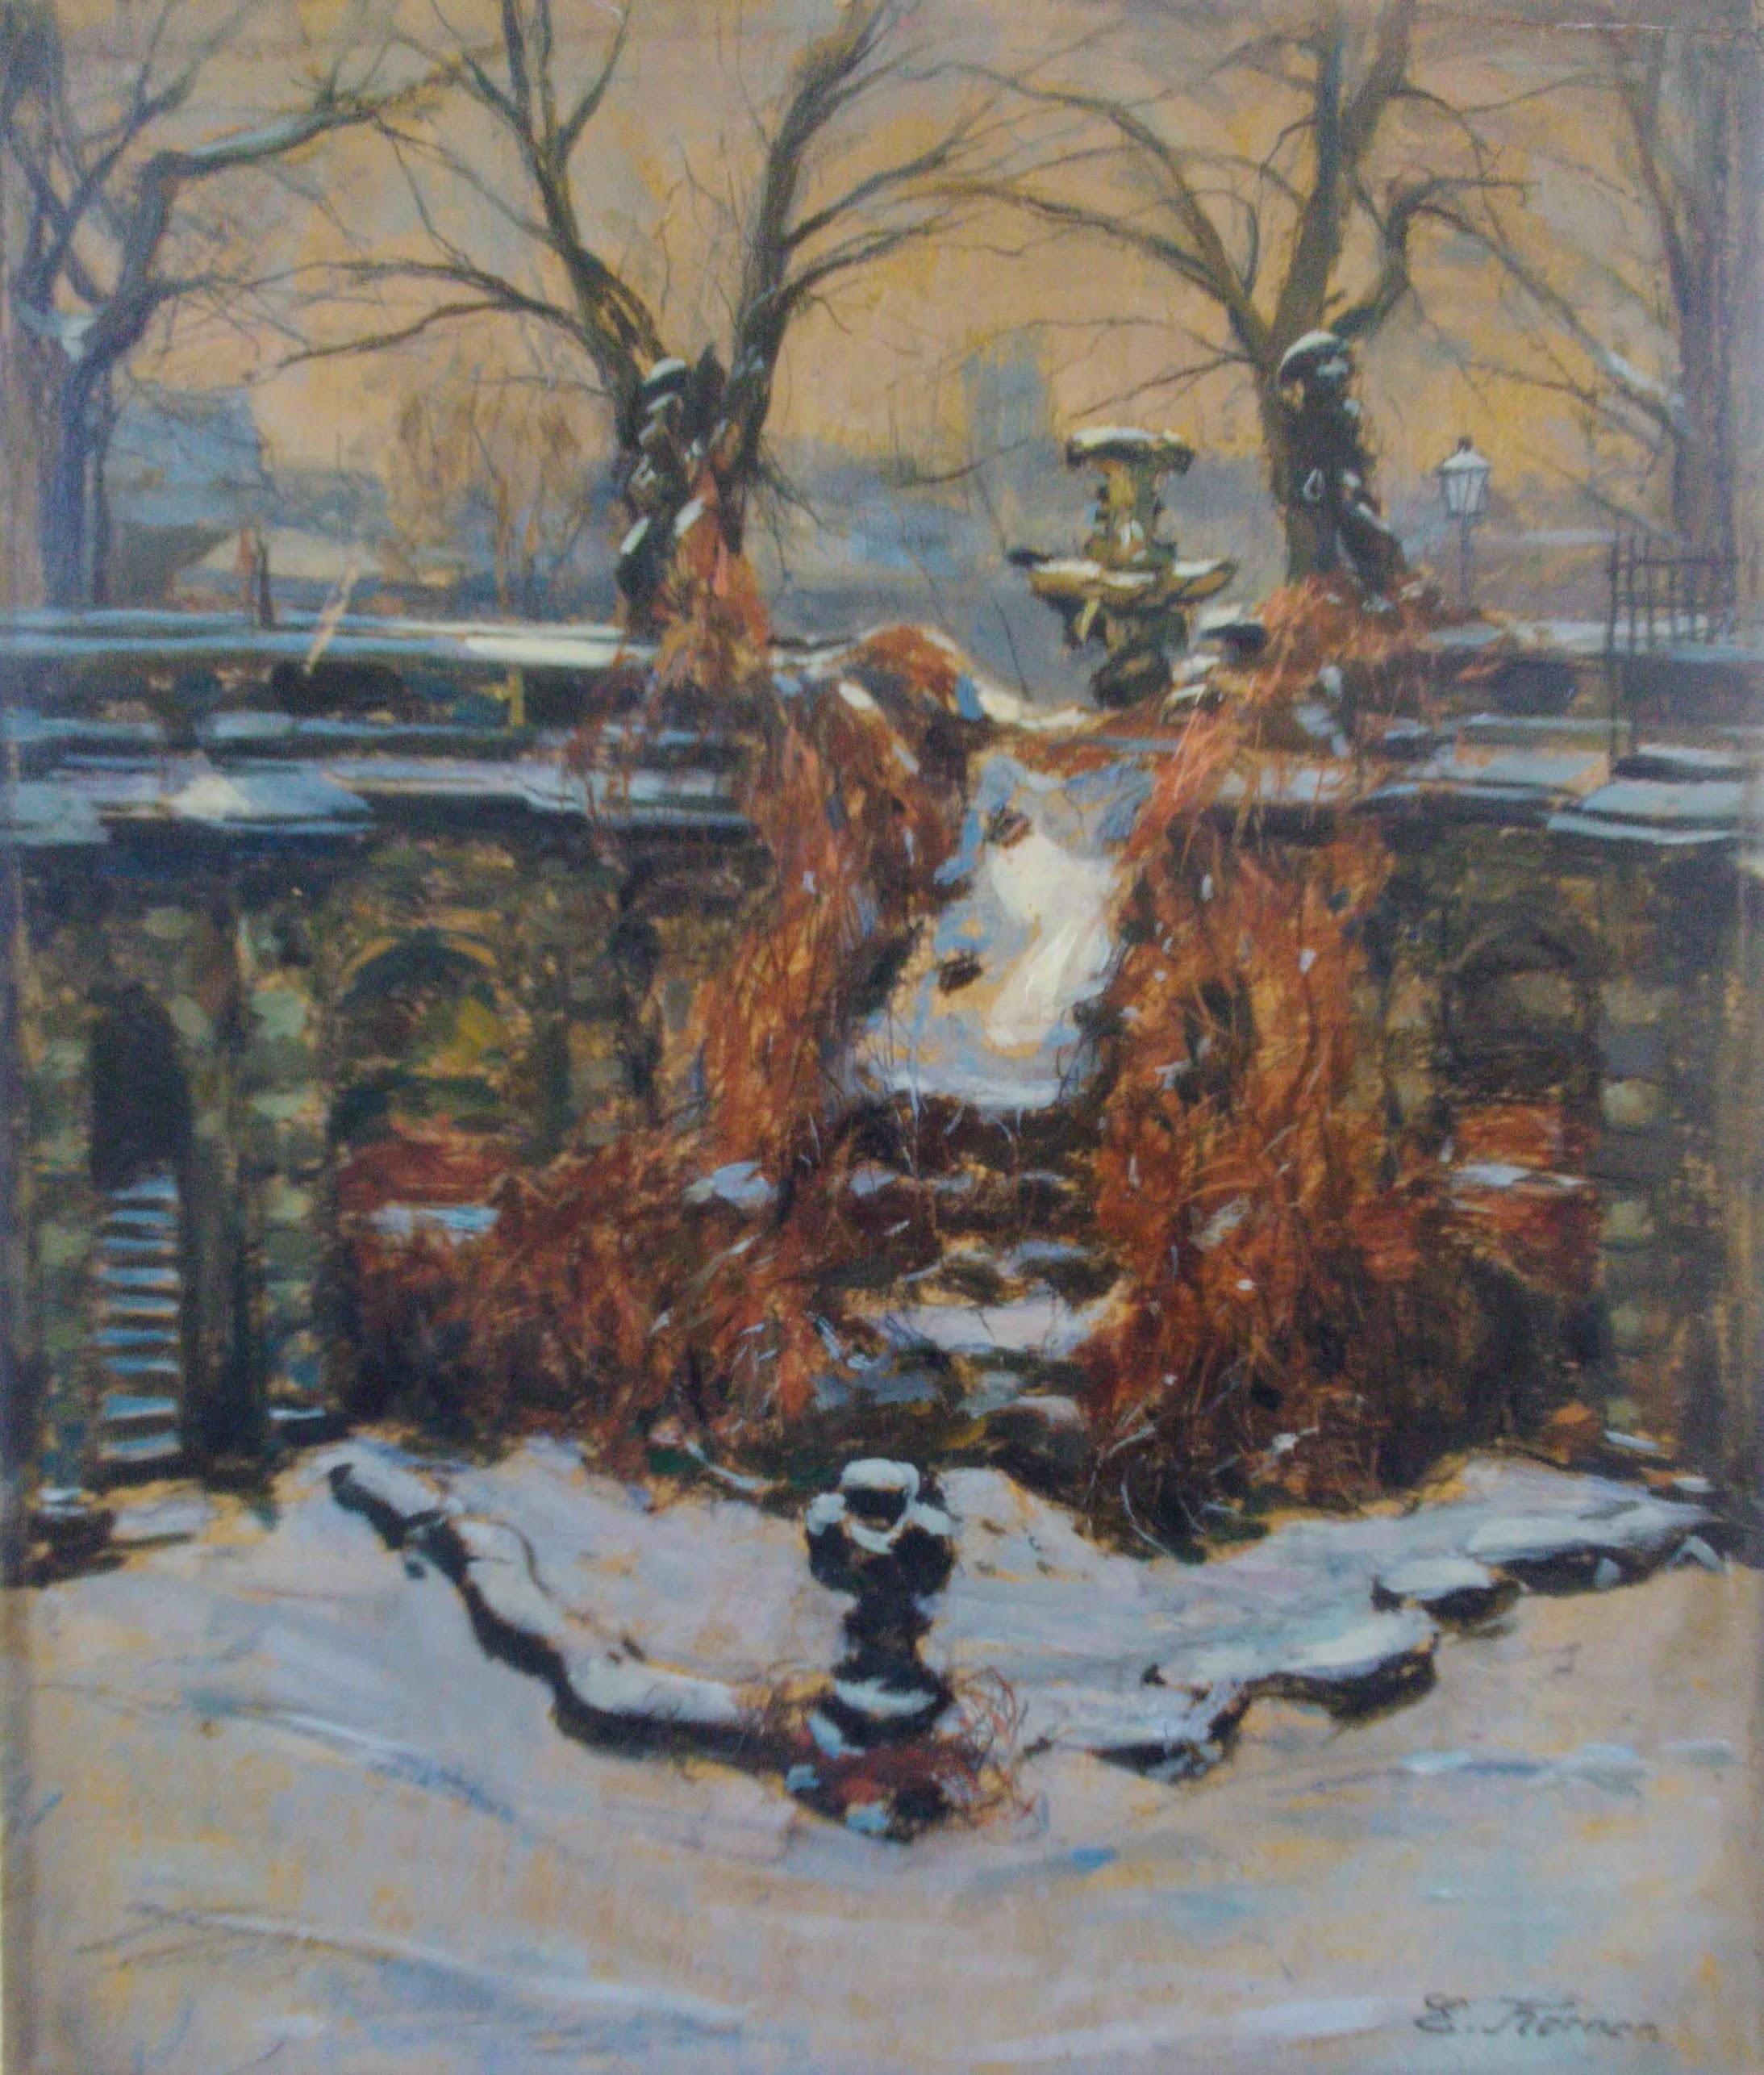 The Palace gardens in the Snow, by Dresden Impressionist Edmund Körner (1873 -1930). 
Körner was the master student of Gotthart Kuehl, and is renowned for the way in which he handles colours. His palette for
this wintery view of a park is both